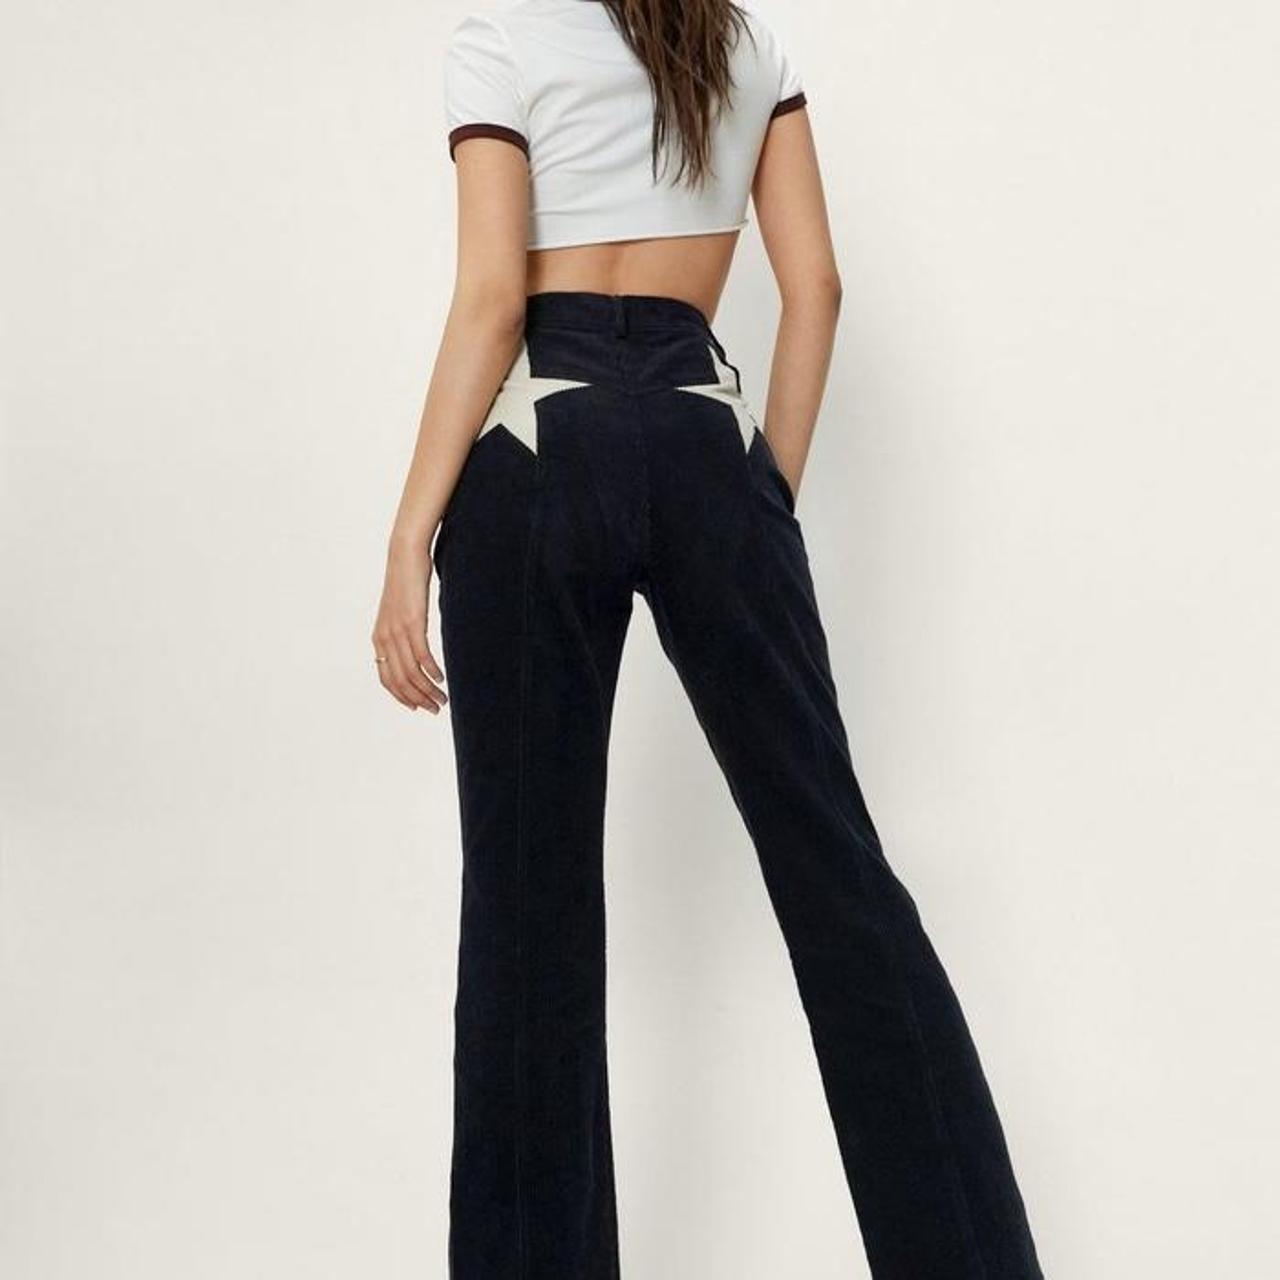 Nasty Gal Women's Black and White Trousers